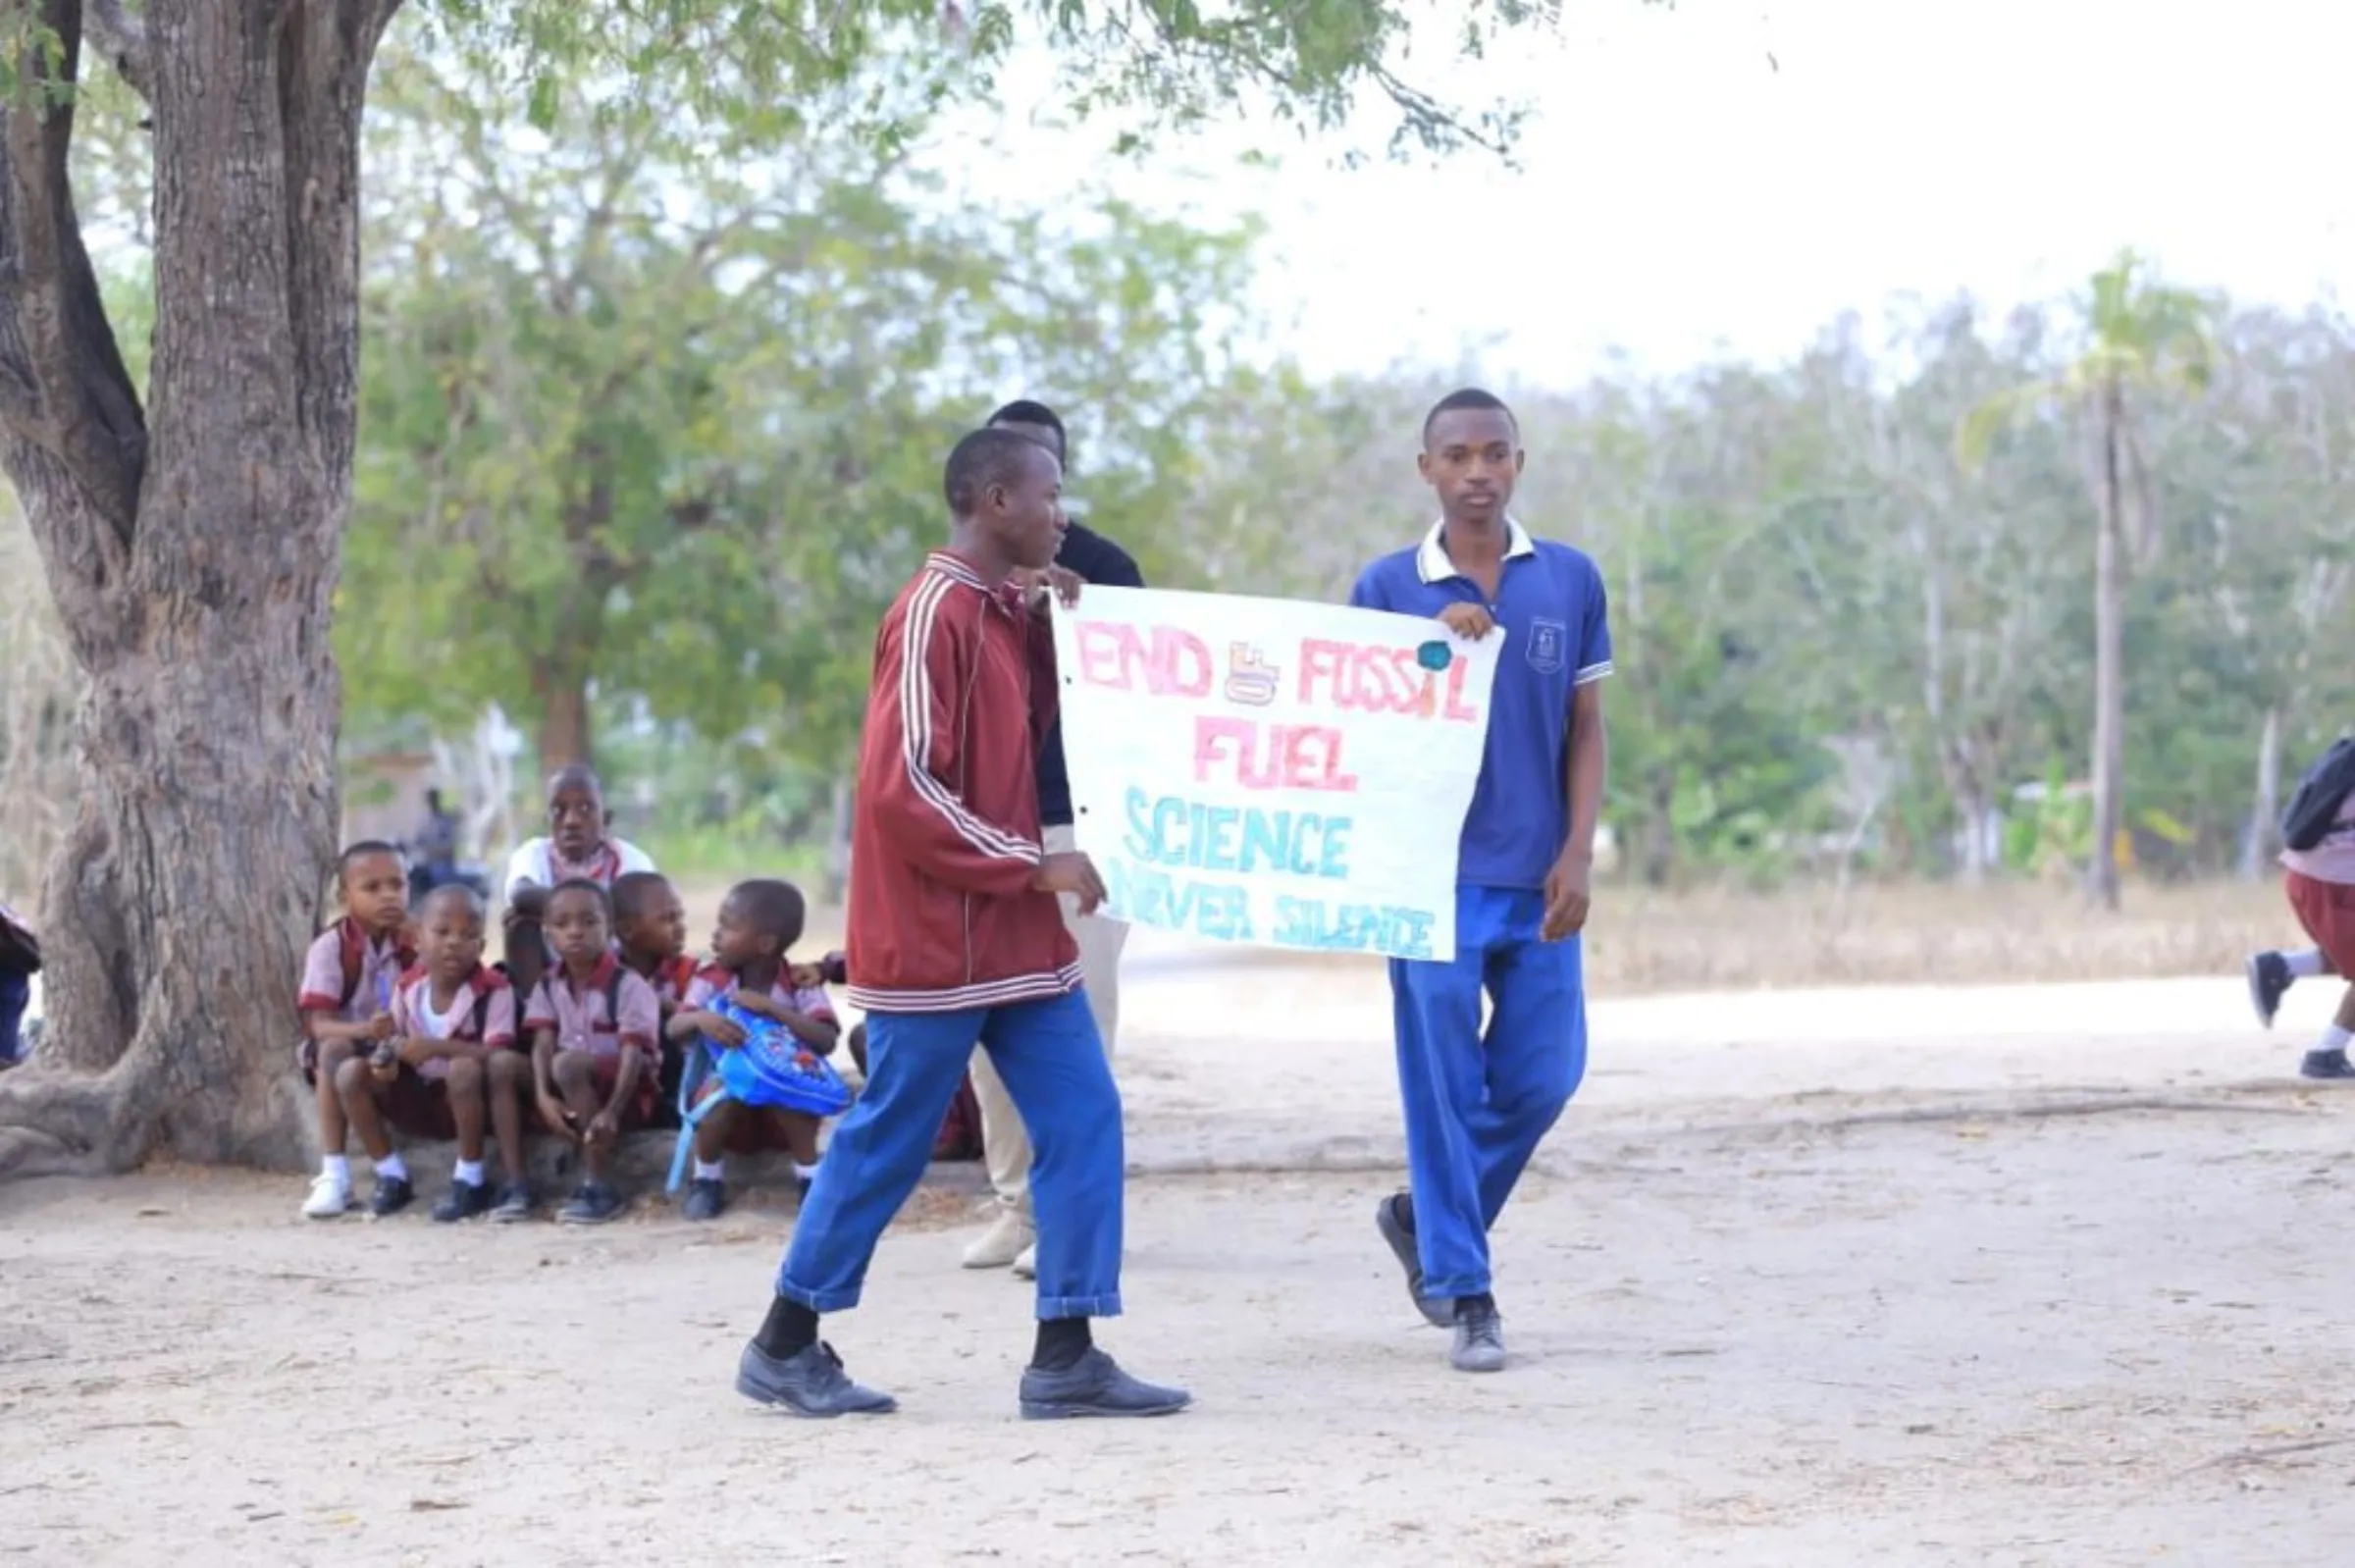 Two students hold a sign reading ‘End of Fossil Fuel, Science Never Silence’ at a climate strike in the Kibaha district, Tanzania, October 9, 2022